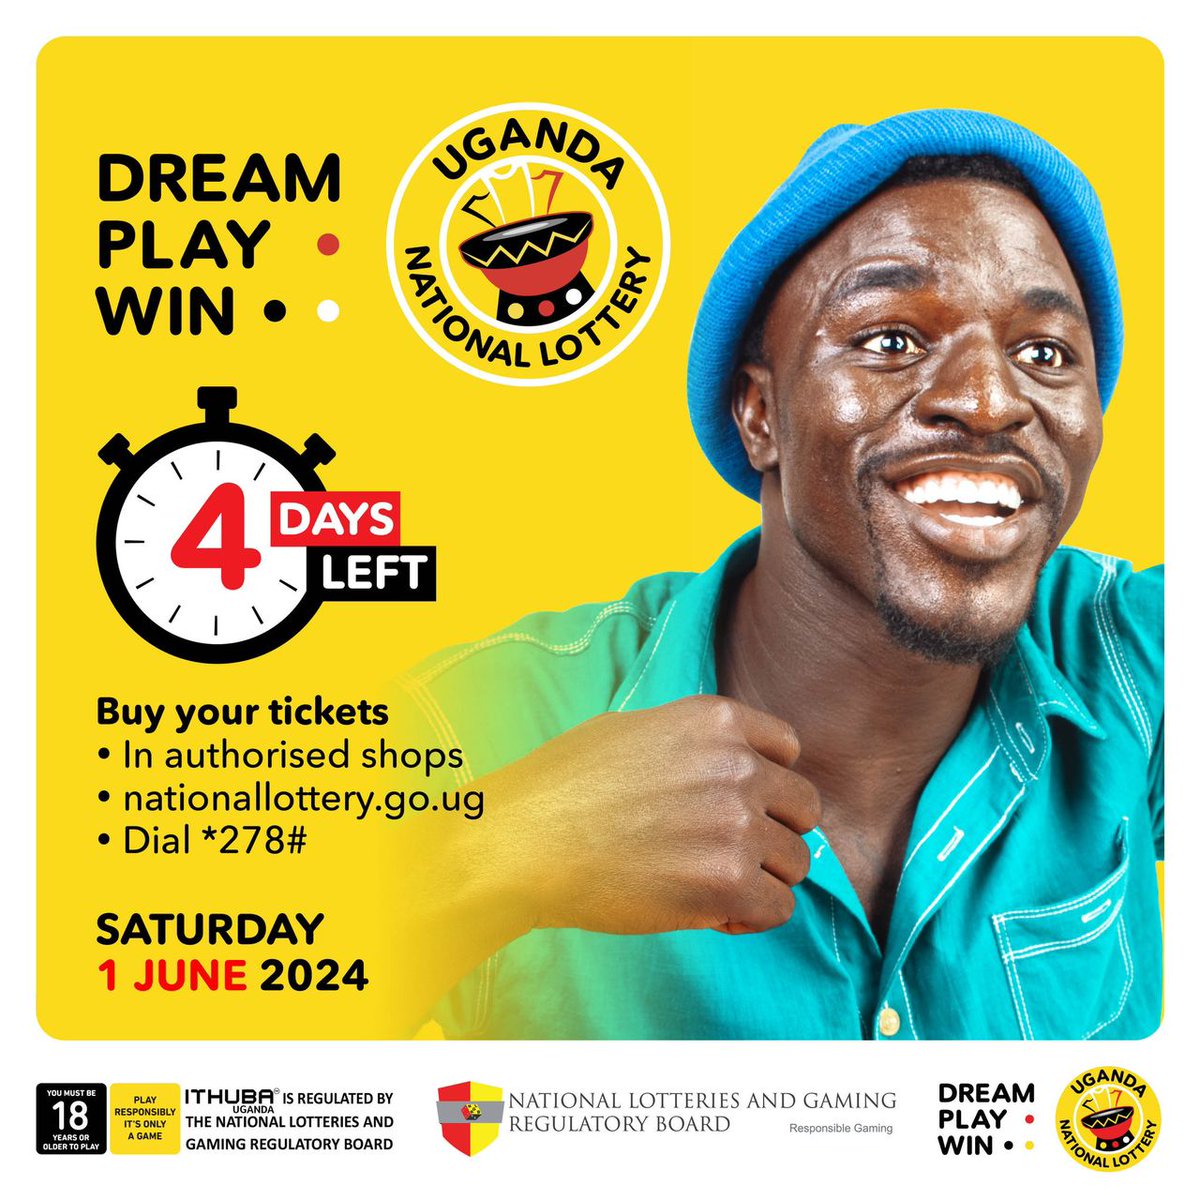 Feeling lucky? Don't miss out on the chance to DREAM, PLAY, and WIN ! Only 4 DAYS LEFT until the draw on SATURDAY, Get your tickets now at authorized shops, online at nationallottery.go.ug, or by dialing *278#. Remember, play responsibly! #UgandaNationalLottery